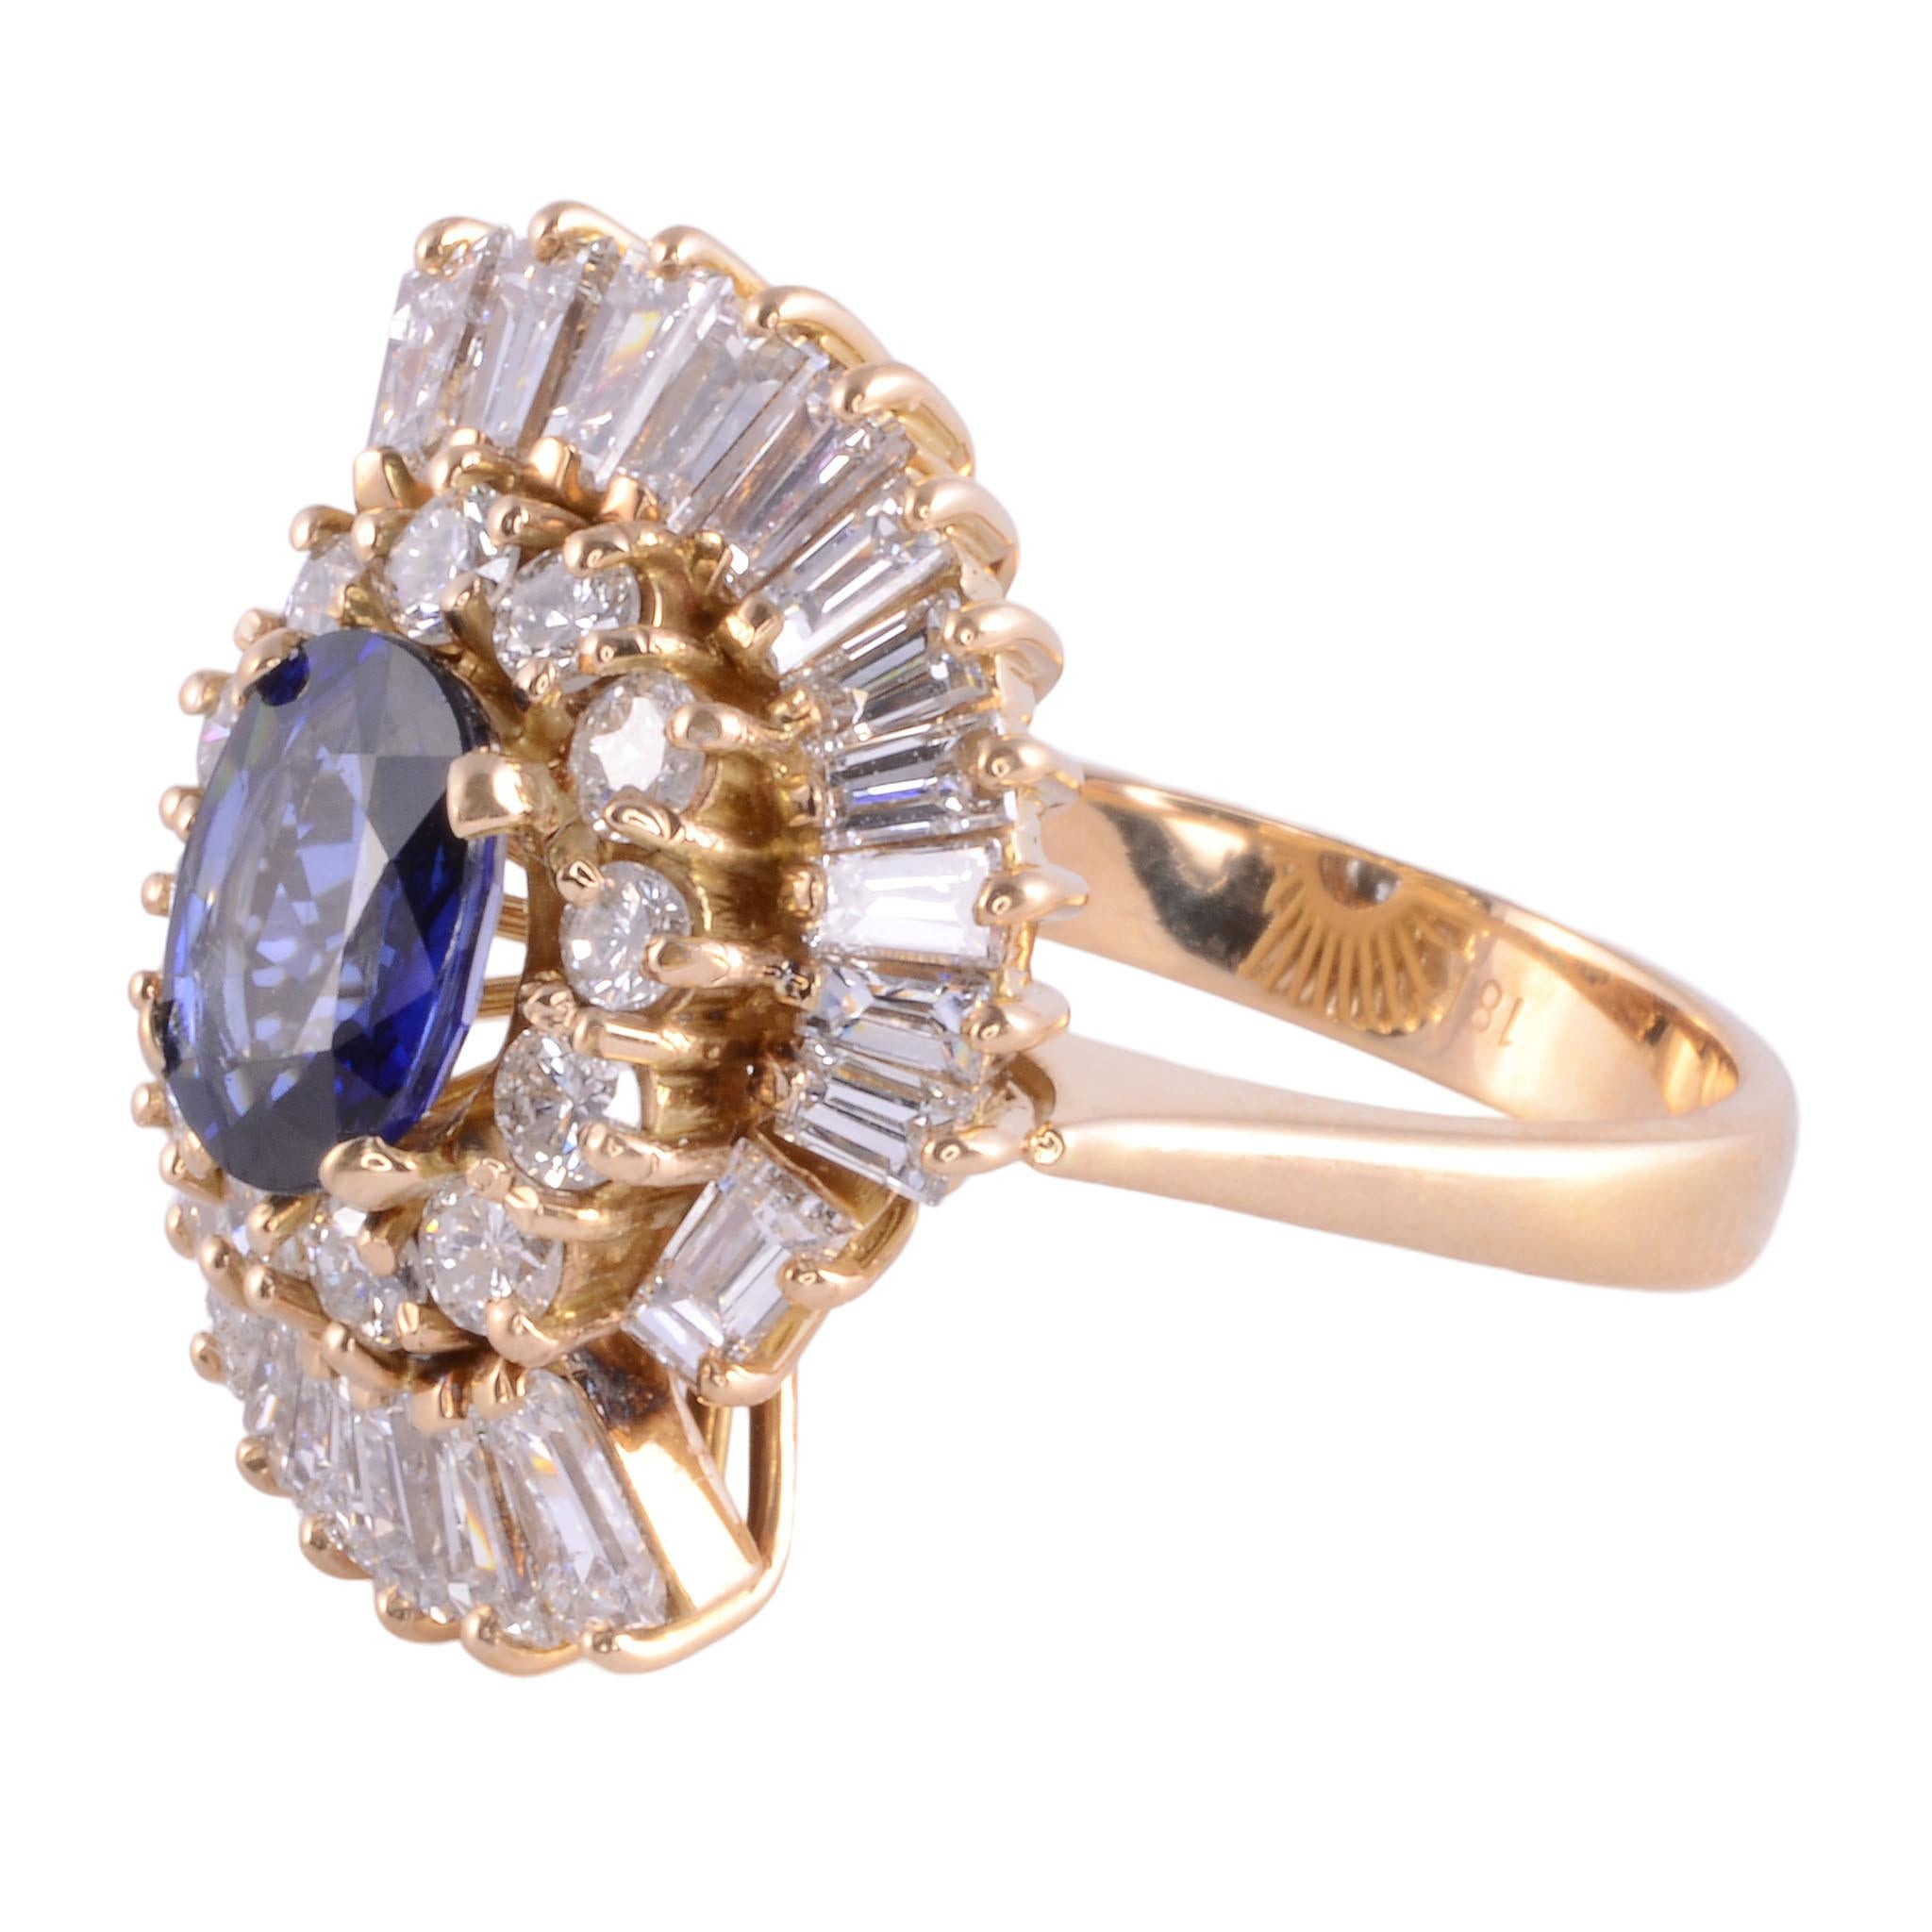 Estate oval sapphire & VS diamond 18K ring. This custom ring in 18 karat yellow gold features a 1.45 carat oval sapphire with fine bright blue color. The sapphire is accented with 2.75 carats of round brilliant and baguette cut diamonds with VS